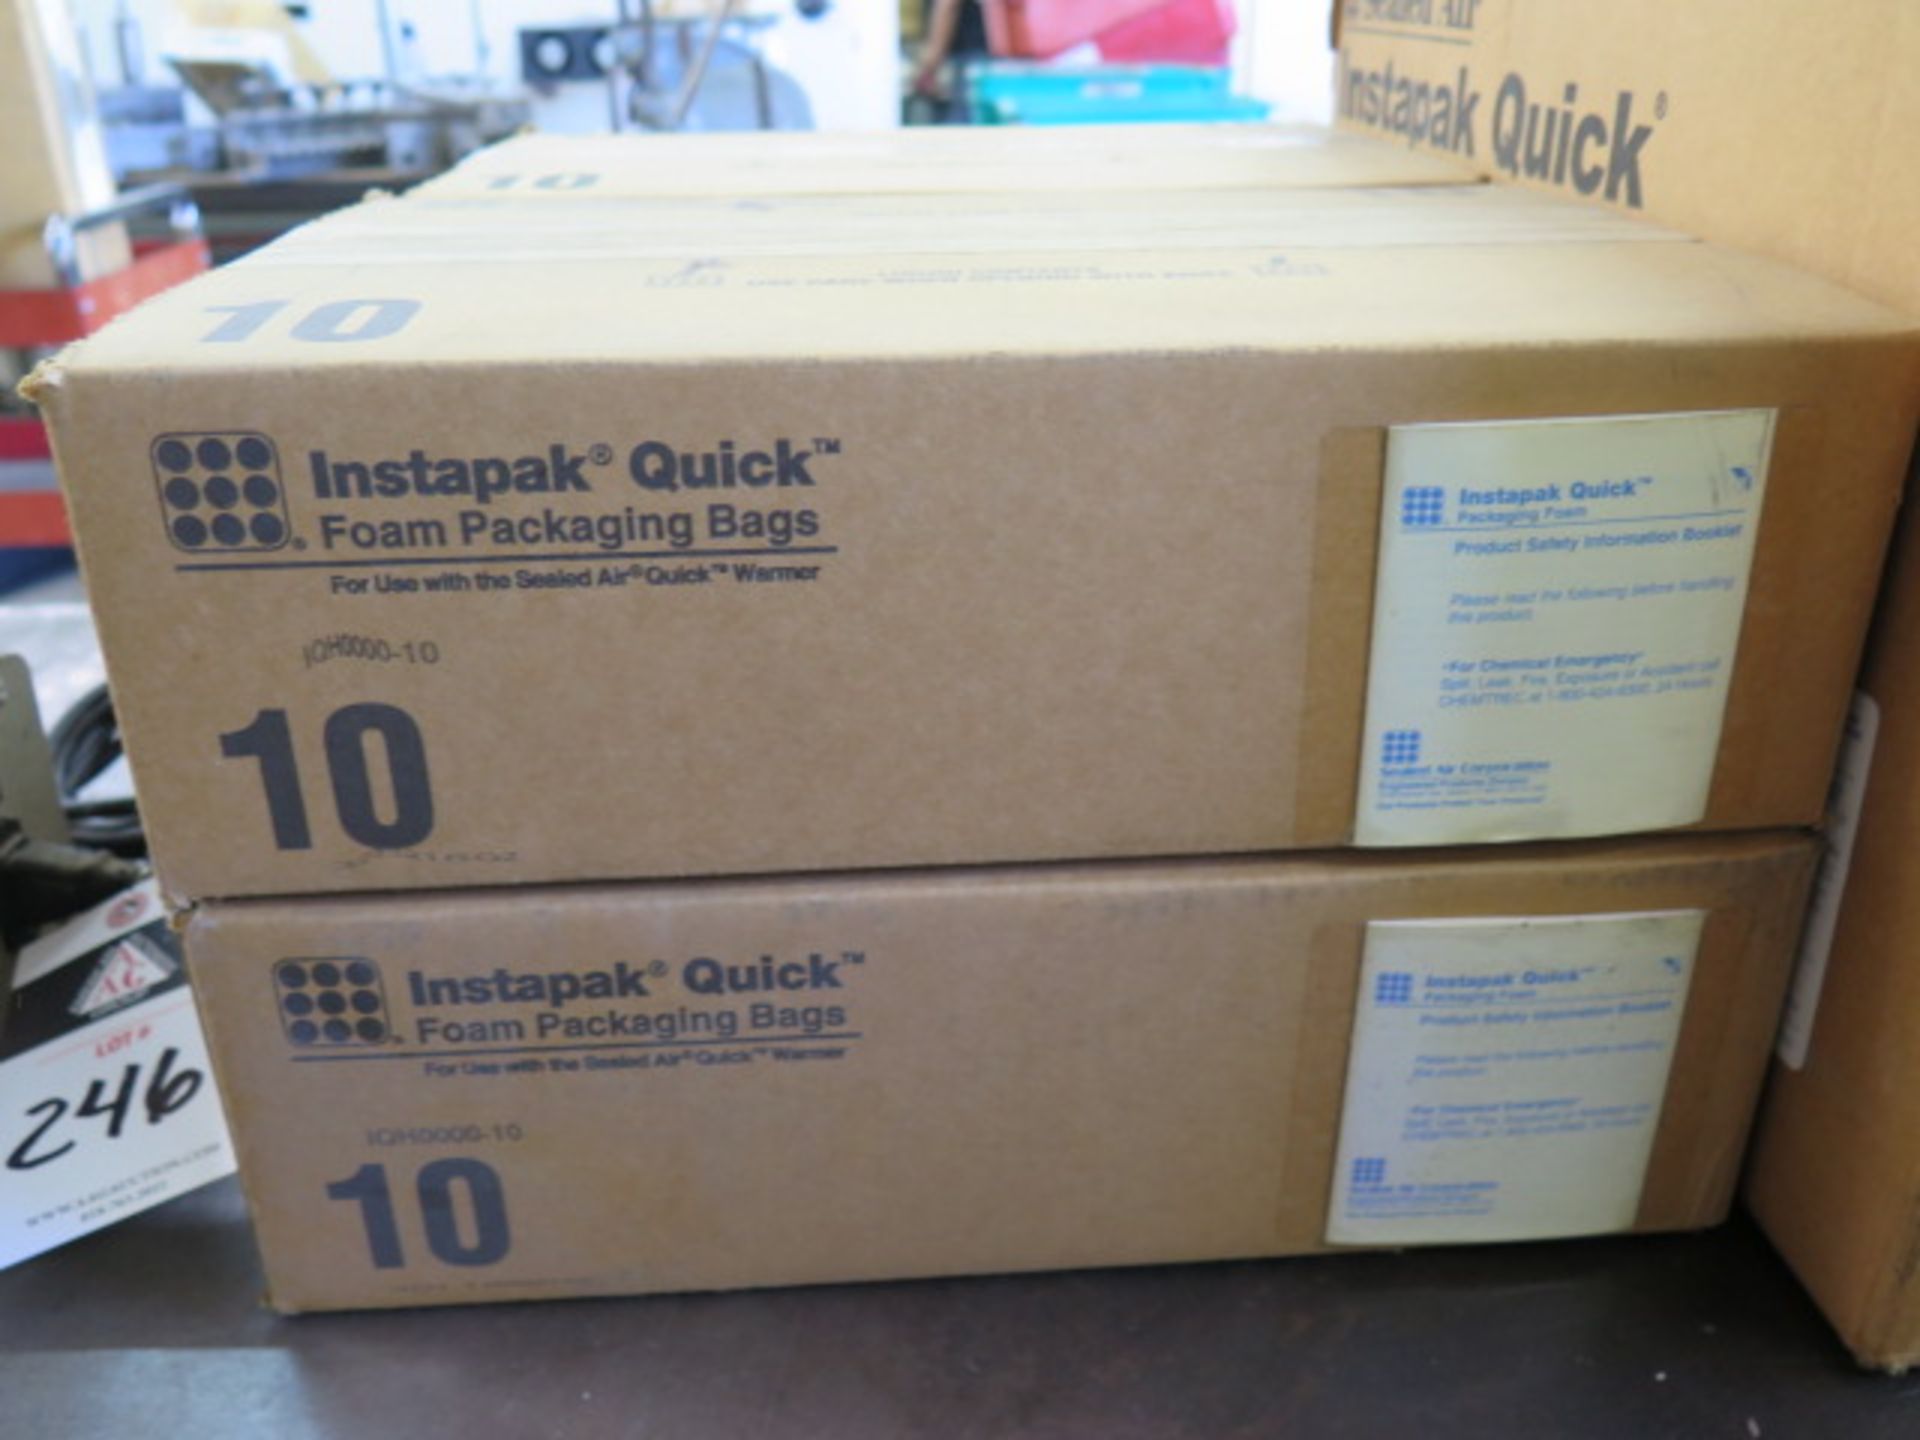 Sealed Air "Instapak Quick" Foam Packaging System (SOLD AS-IS - NO WARRANTY) - Image 5 of 9